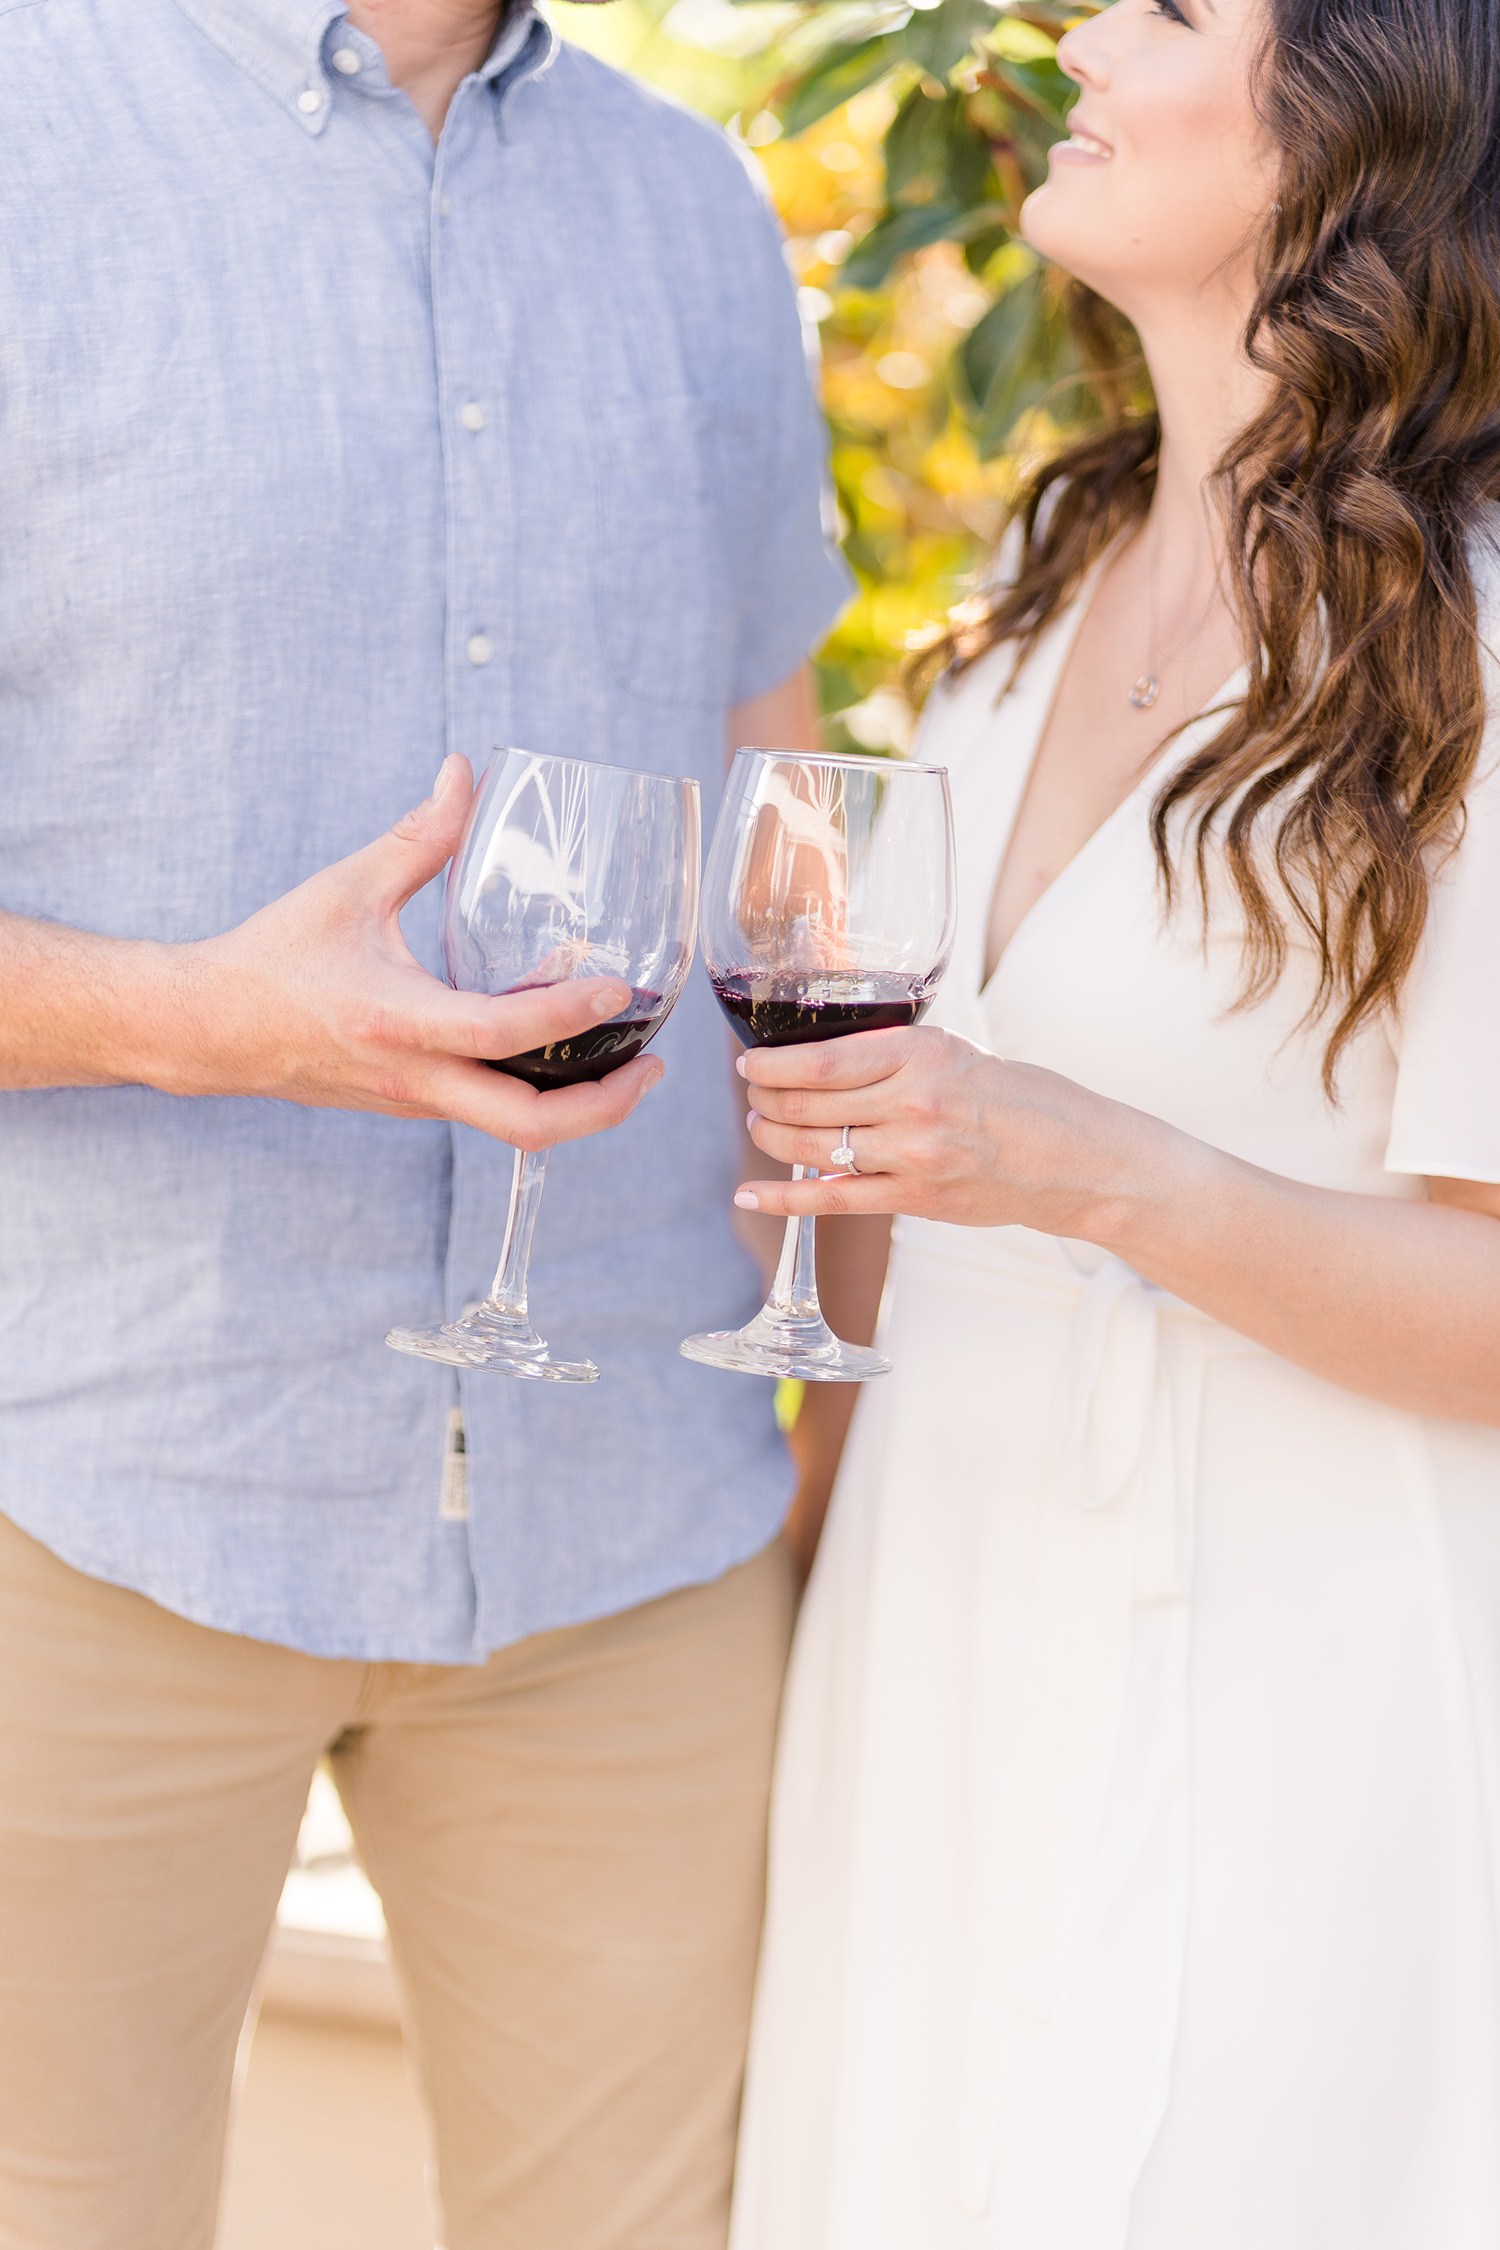 scribner bend vineyards sacramento engagement by adrienne and dani photography